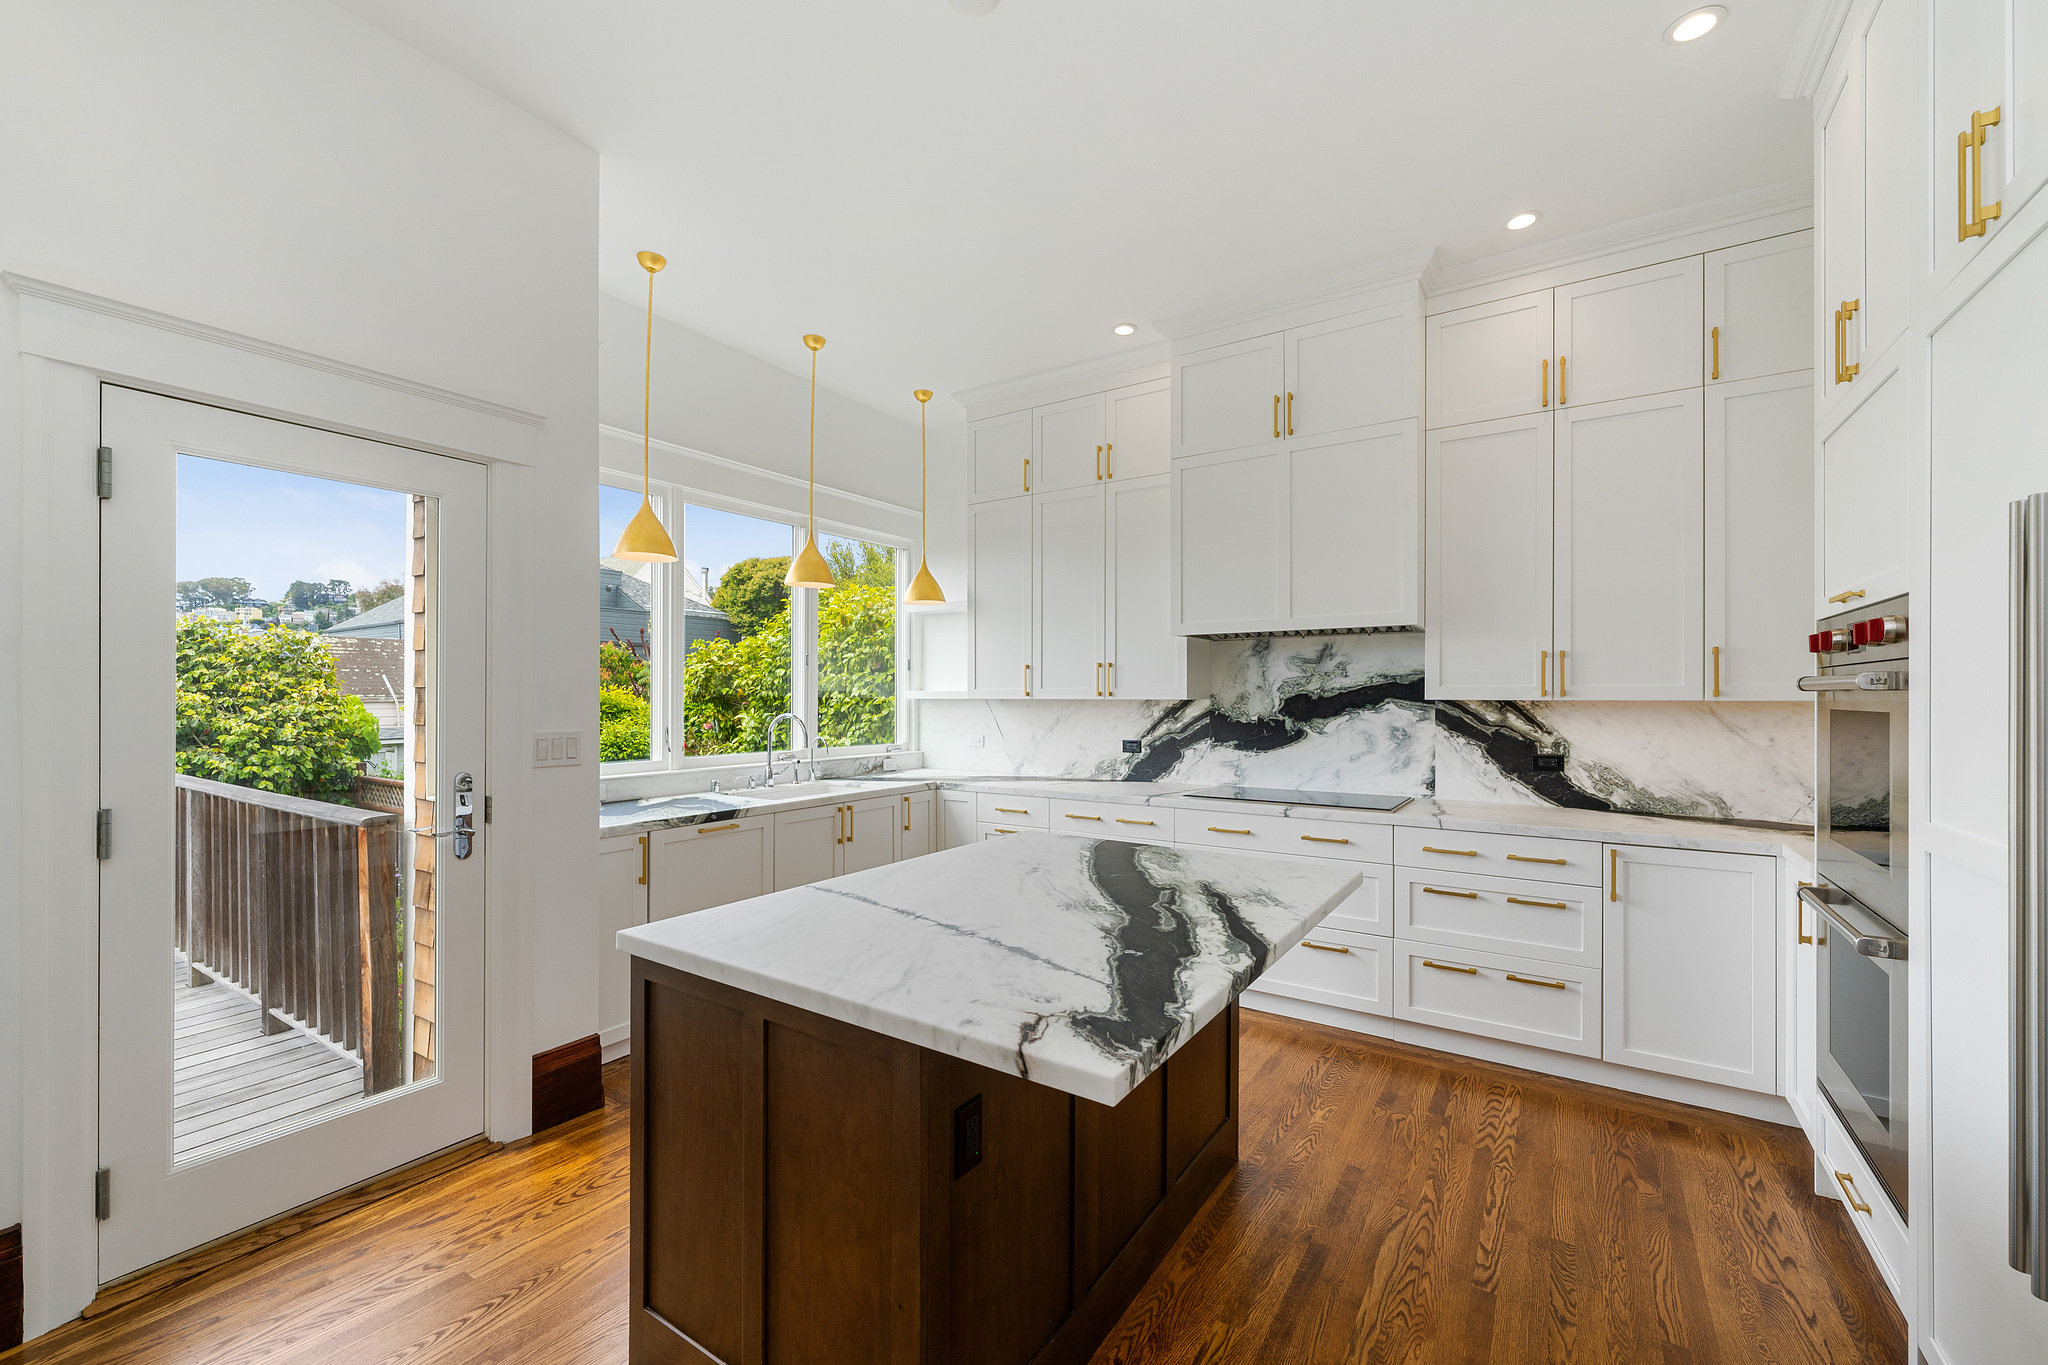 View of a large kitchen with island remodeled by Centoni